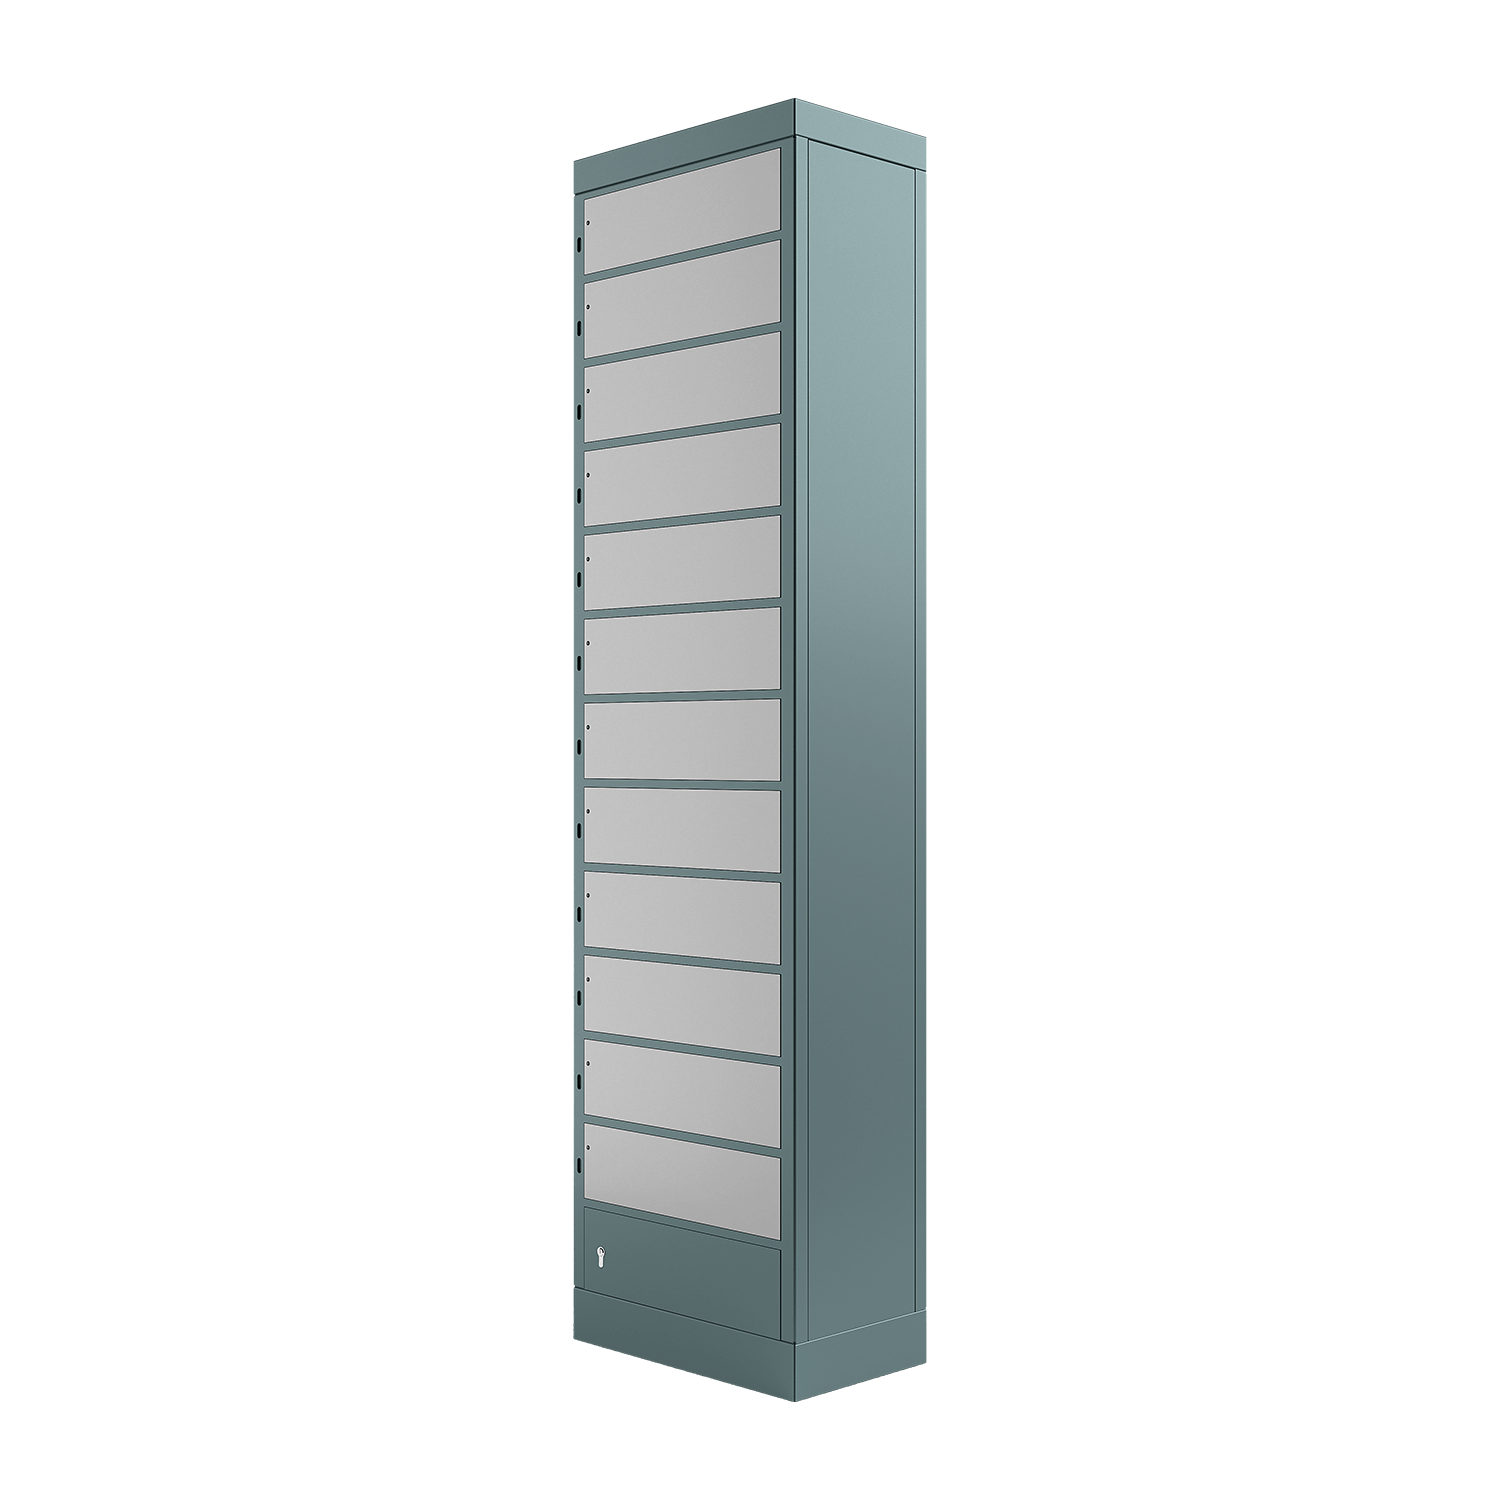 locker compartment system, size M, with 12 compartments for safekeeping, right view